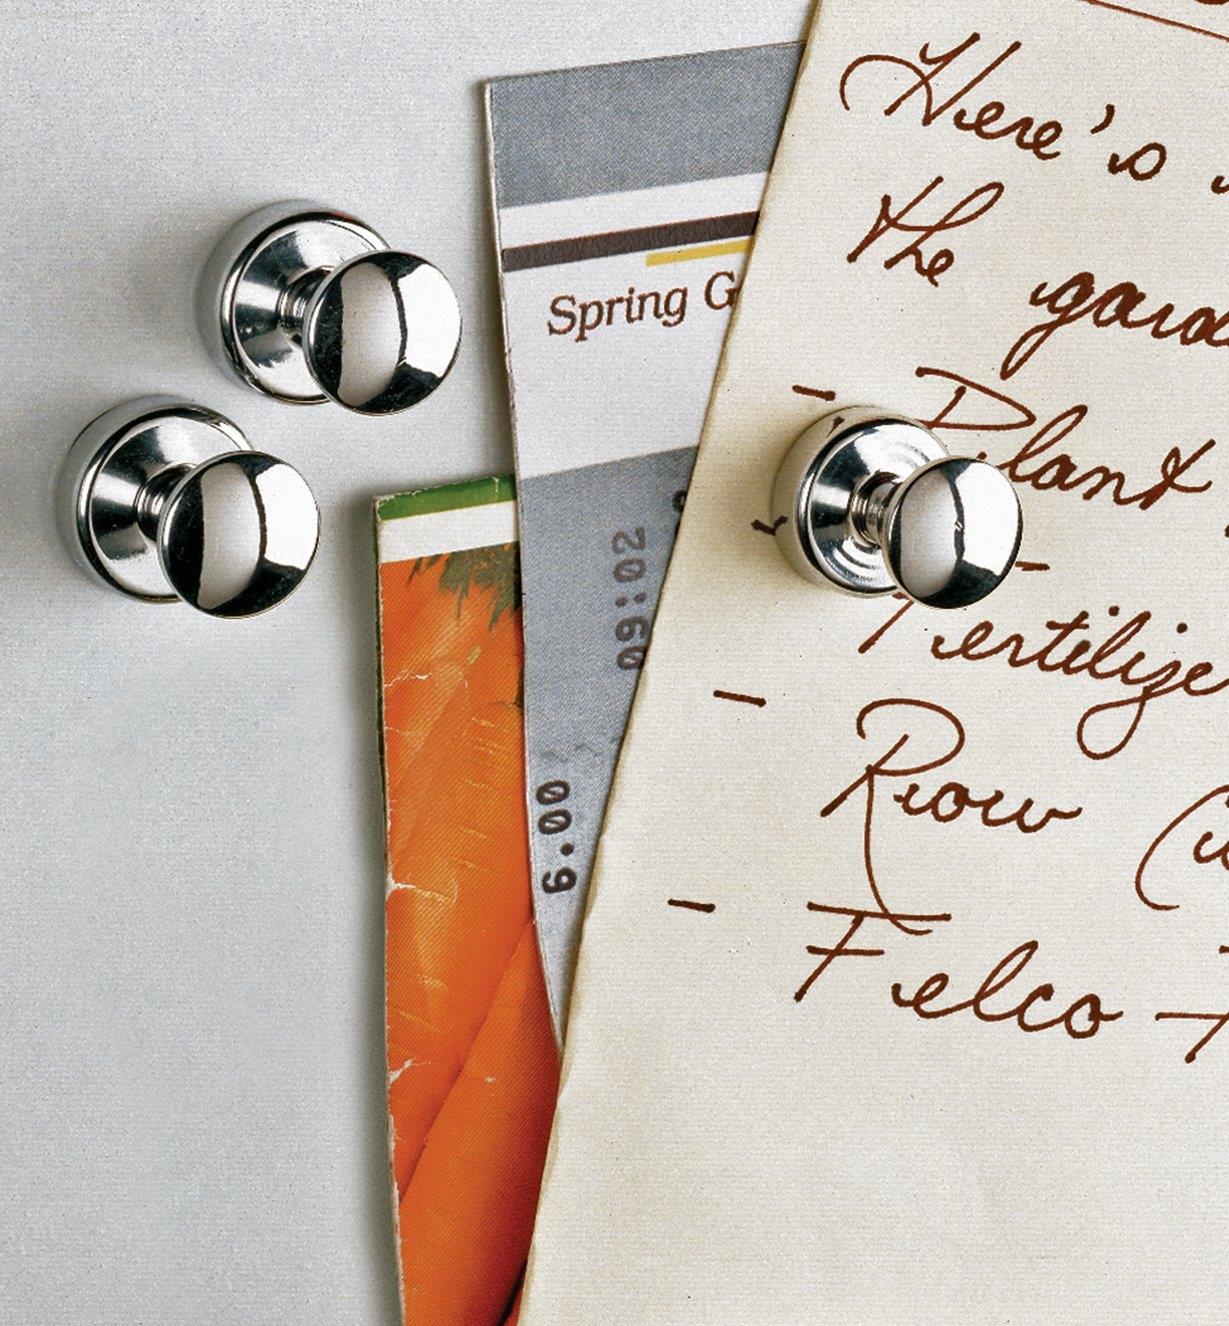 Three fridge magnets on a fridge, one holding up a grocery list and other paper items